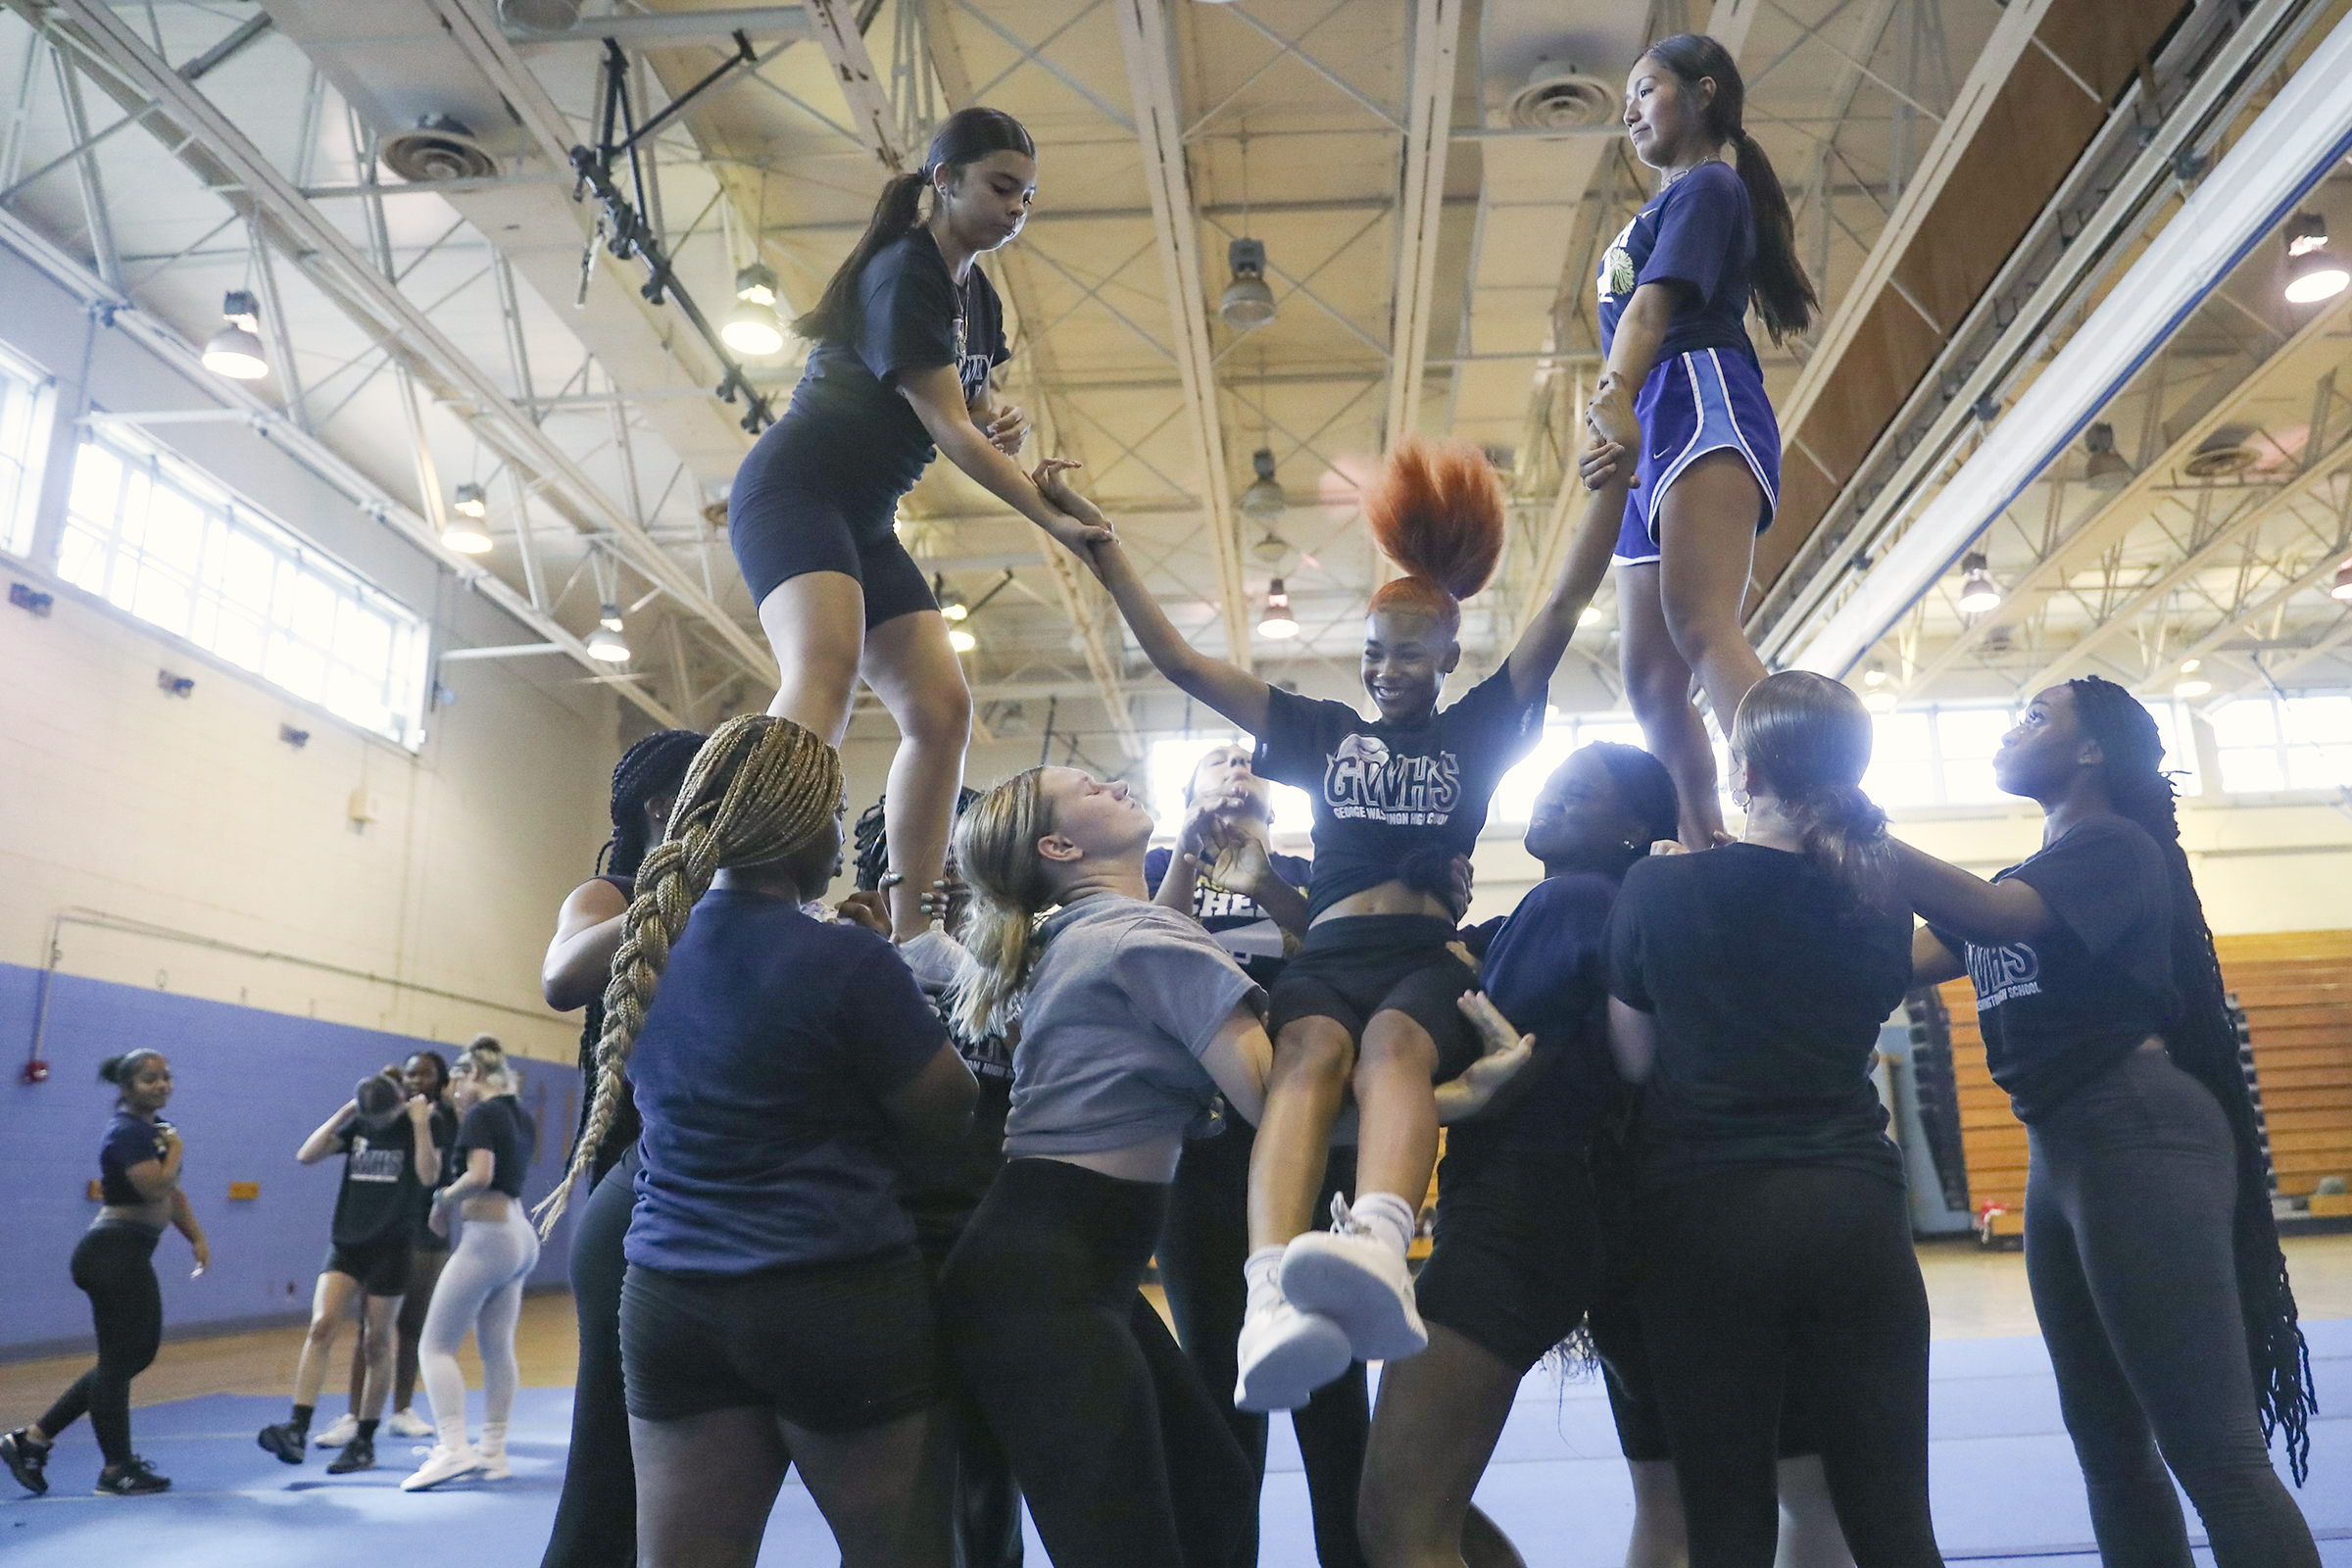 The George Washington cheer team is Philly's first to make it to nationals.  But they need a fundraising miracle